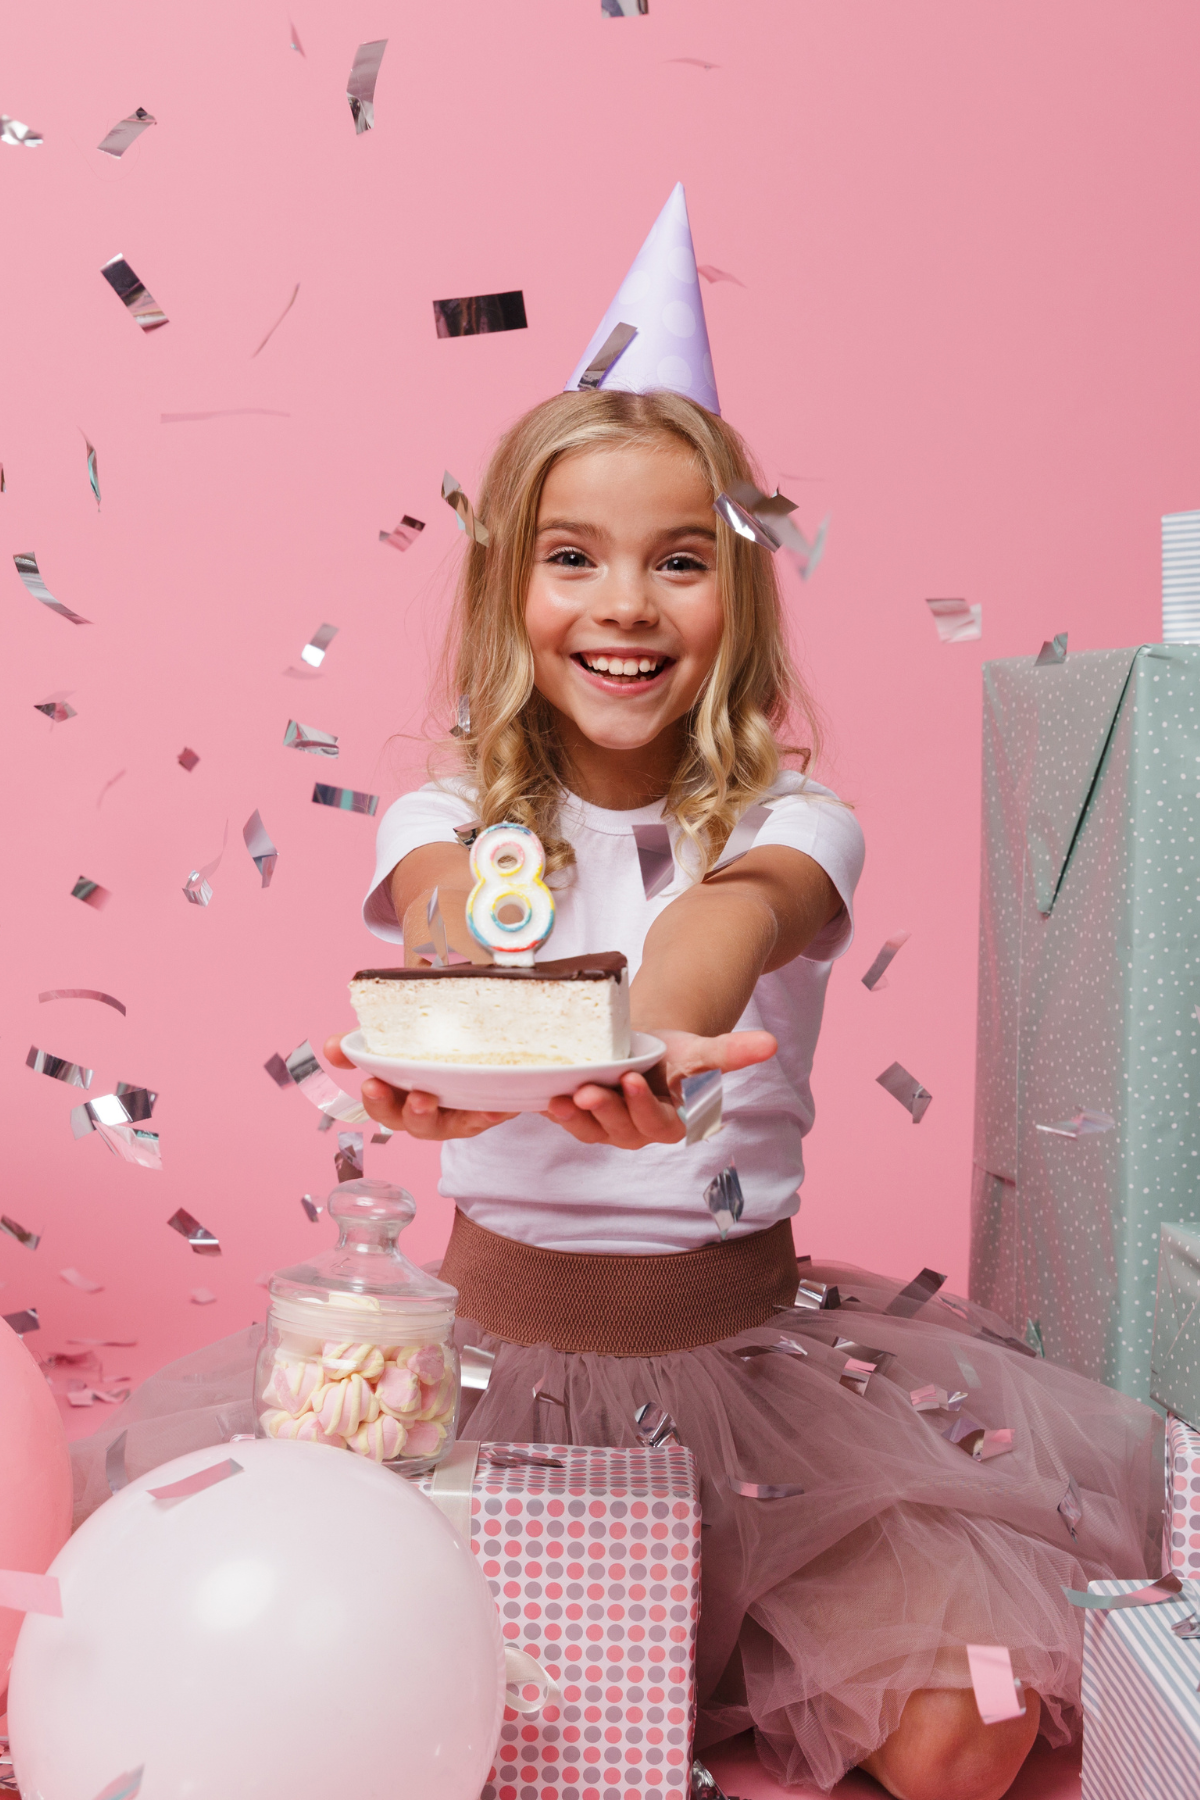 Kid’s Birthday Party Planning Checklist: A Free Guide